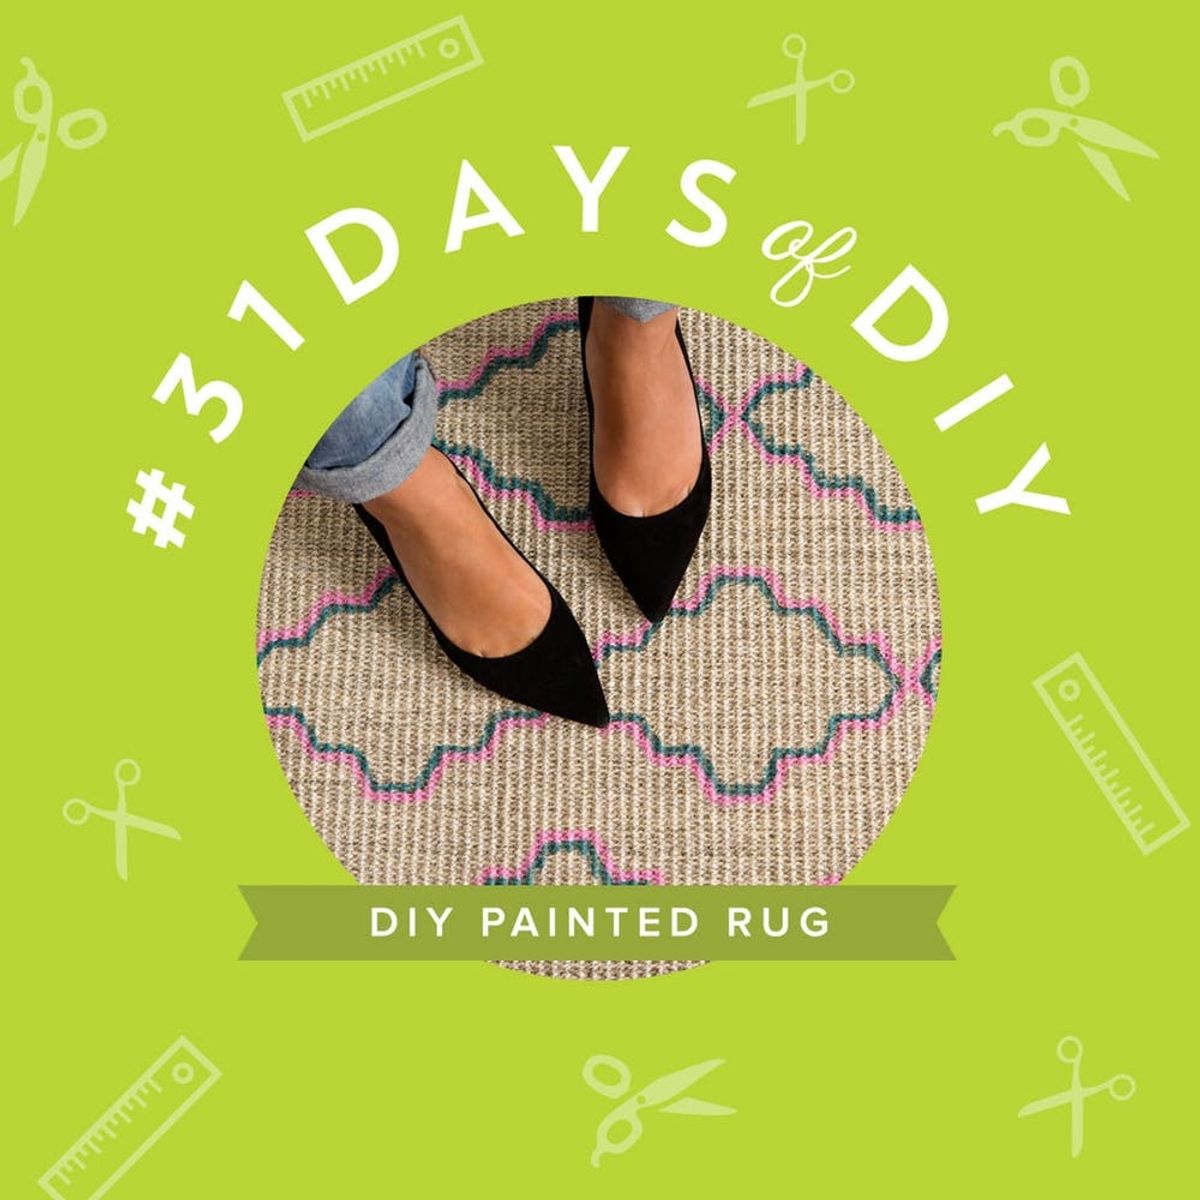 Paint Your Own Patterned Rug on the Cheap